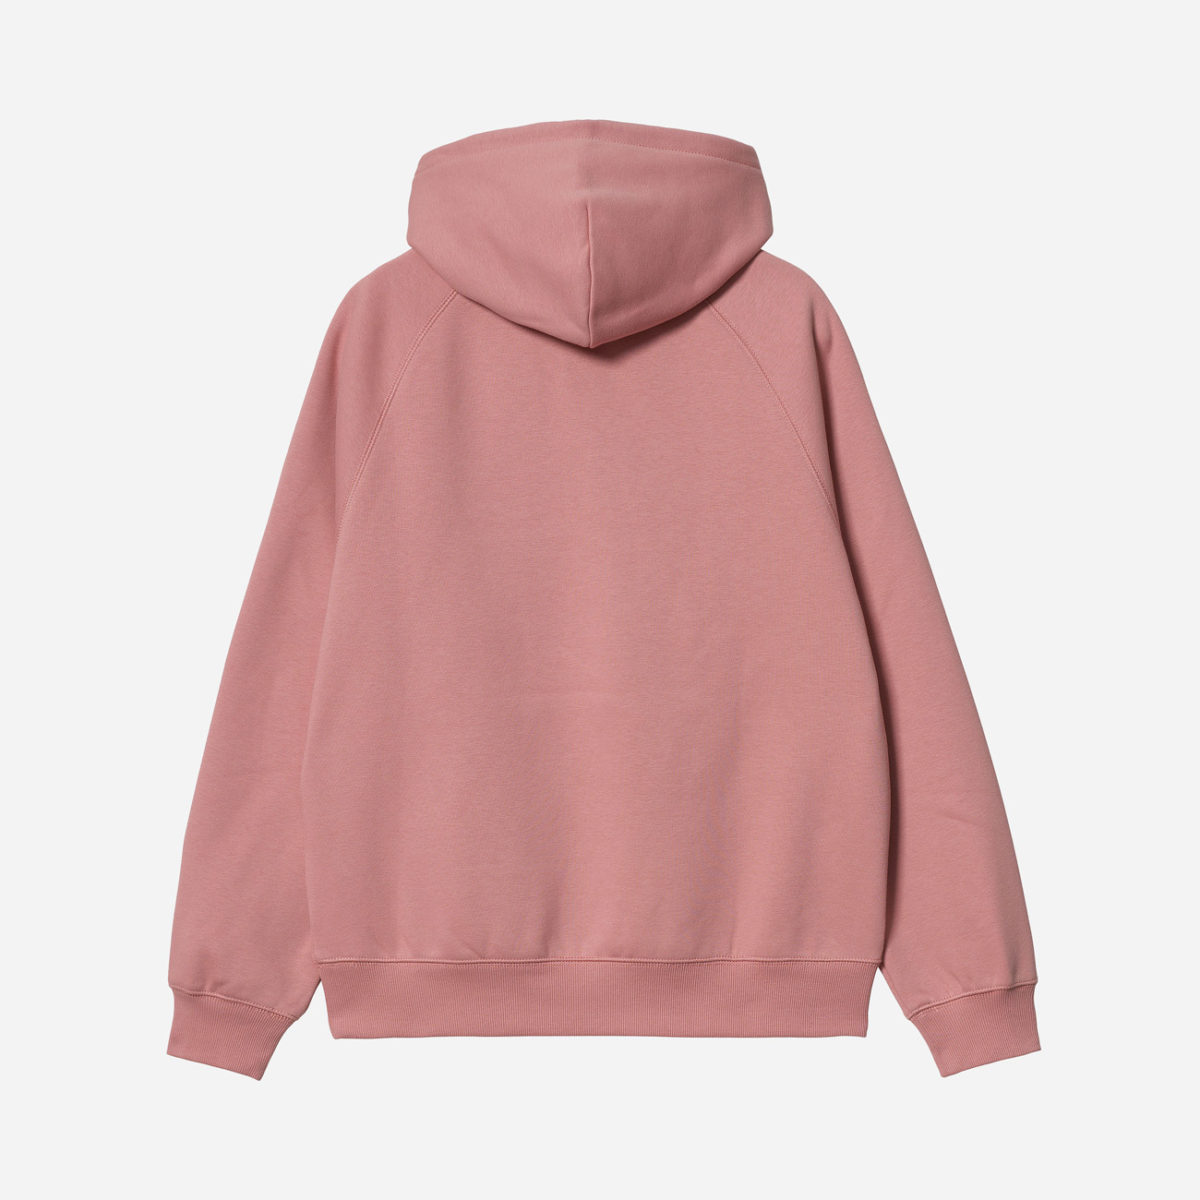 Carhartt Women's Hooded Chase Sweat - Rothko Pink/Gold